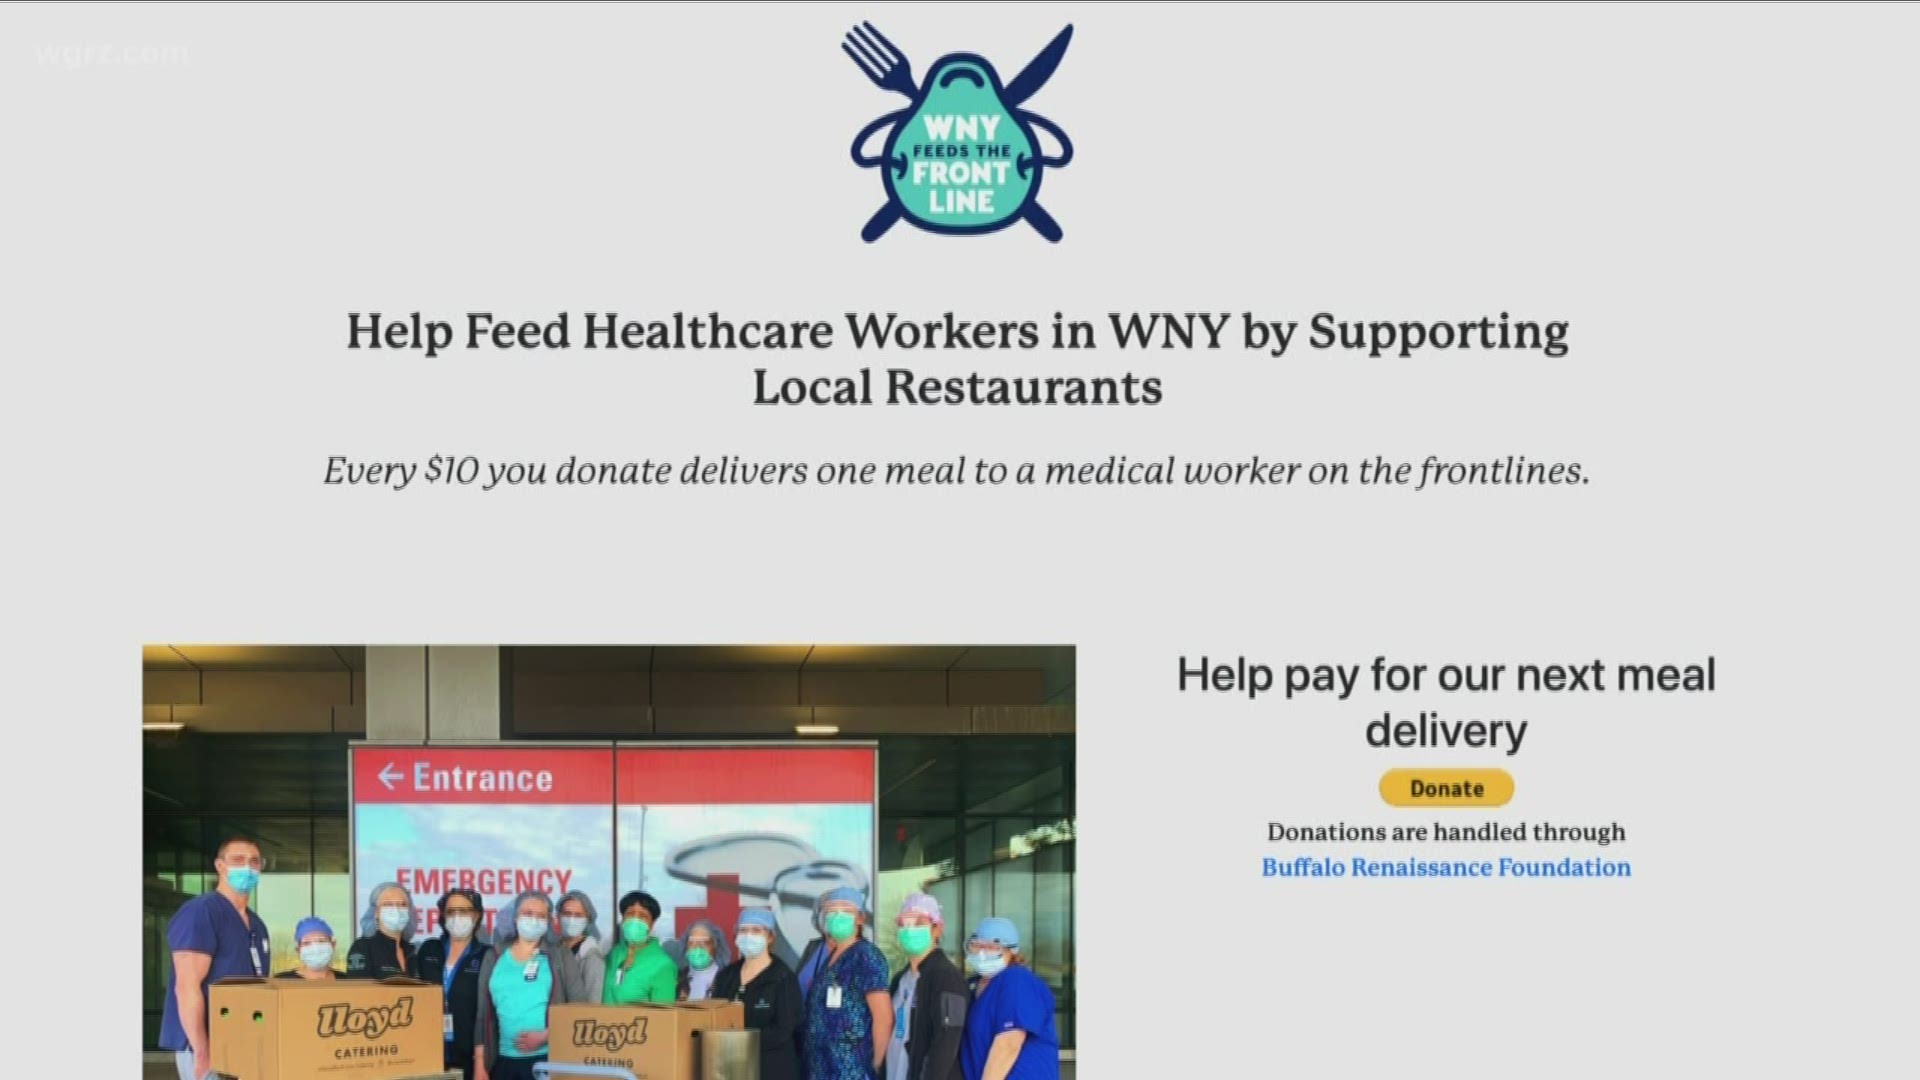 A group from the Buffalo startup community have built a platform that will feed health care workers and keep restaurants open